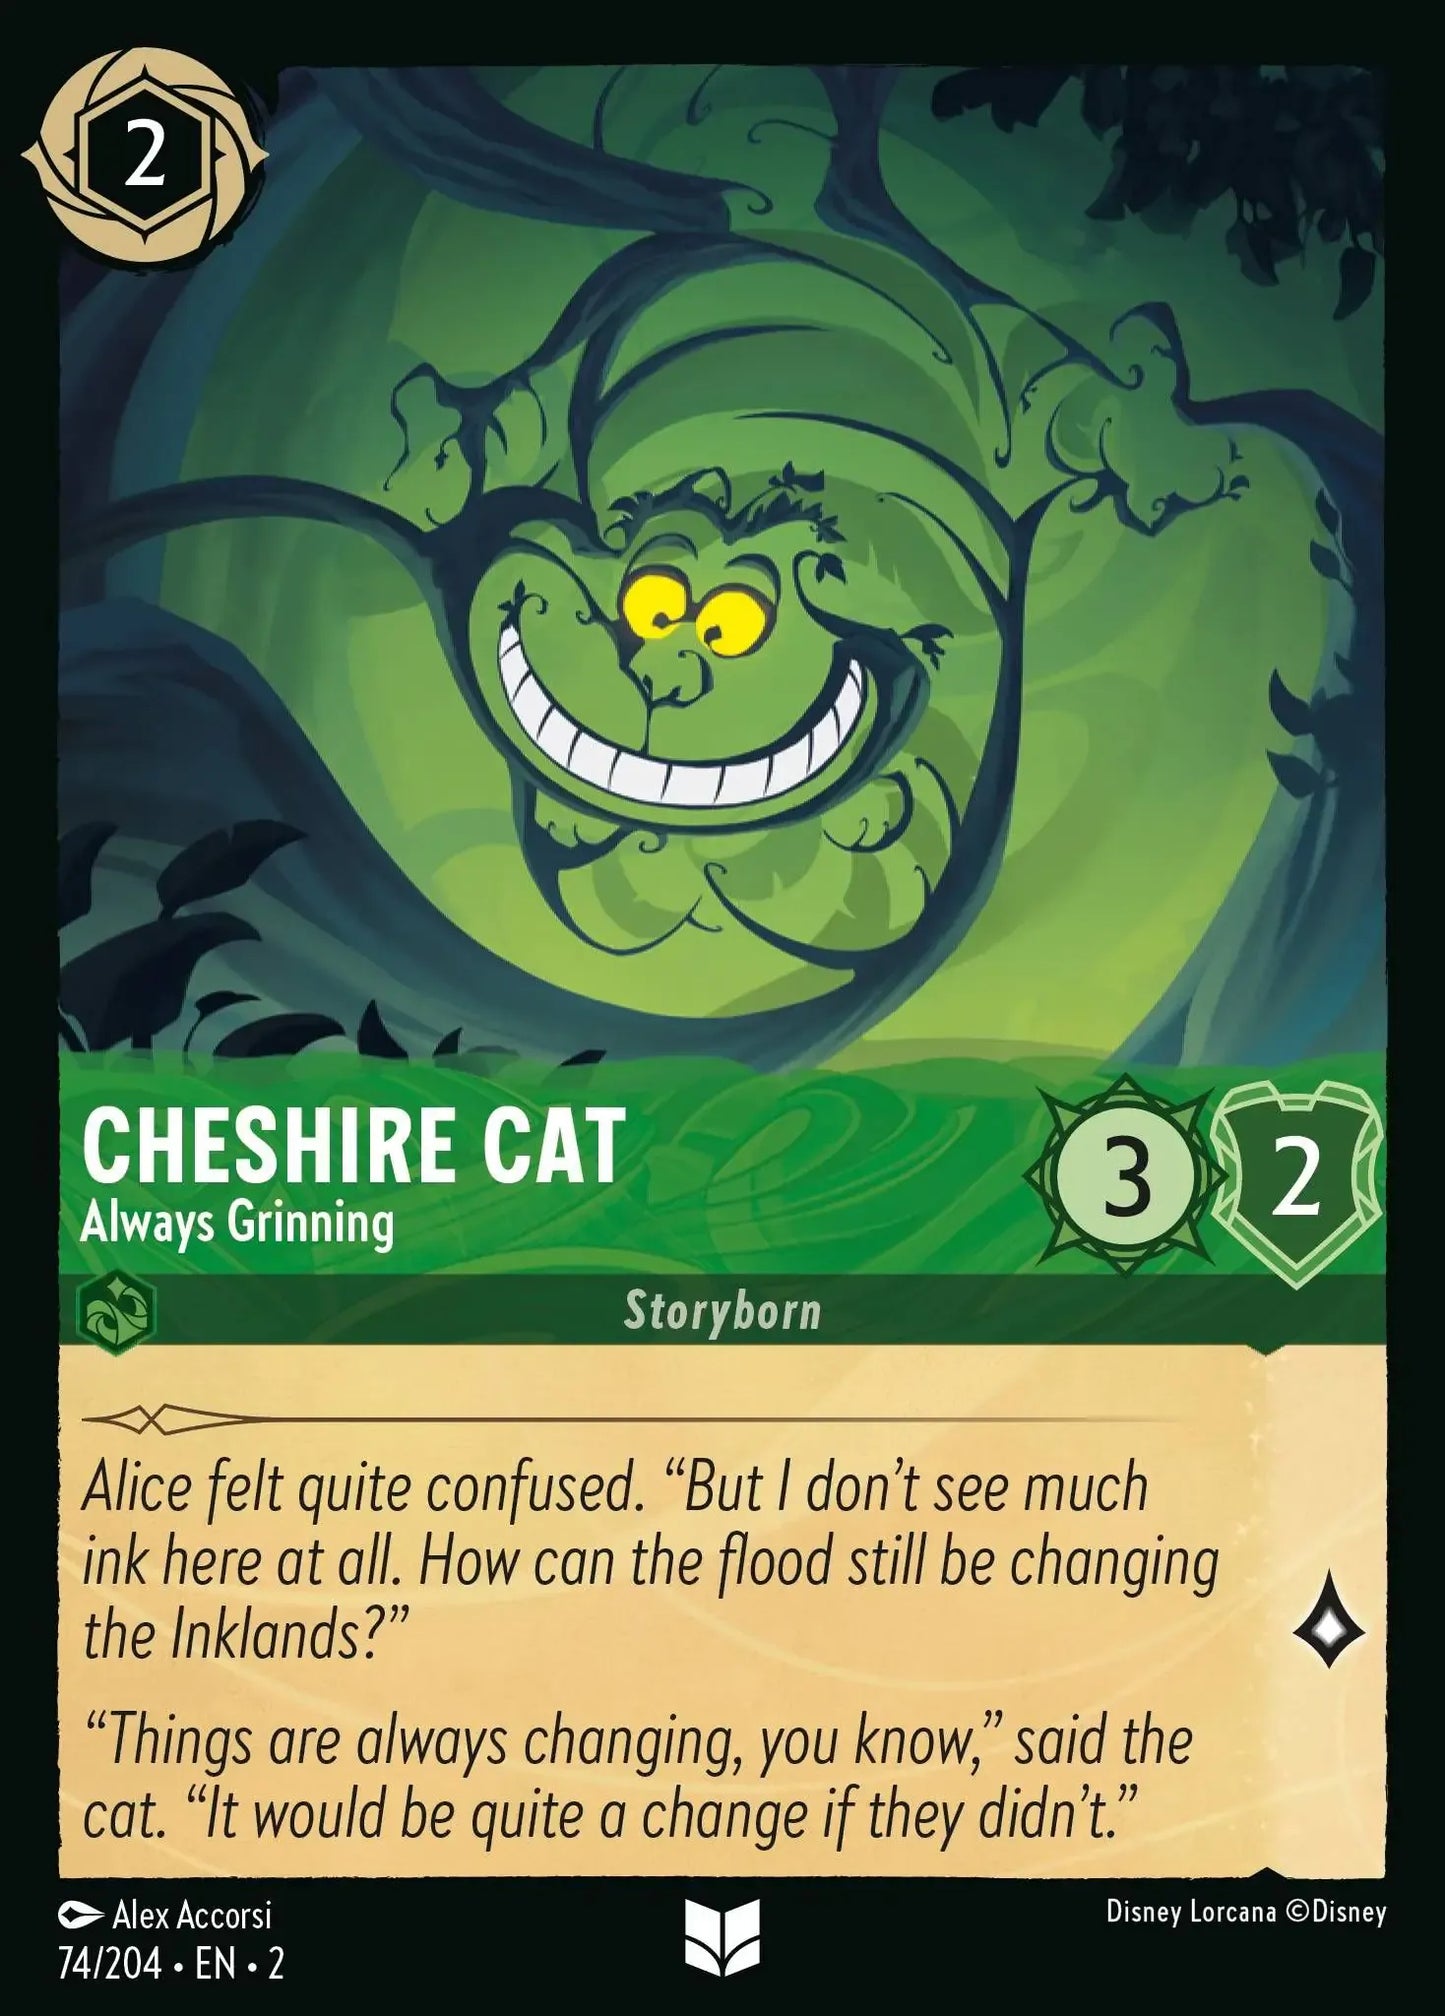 Chat du Cheshire - Toujours souriant